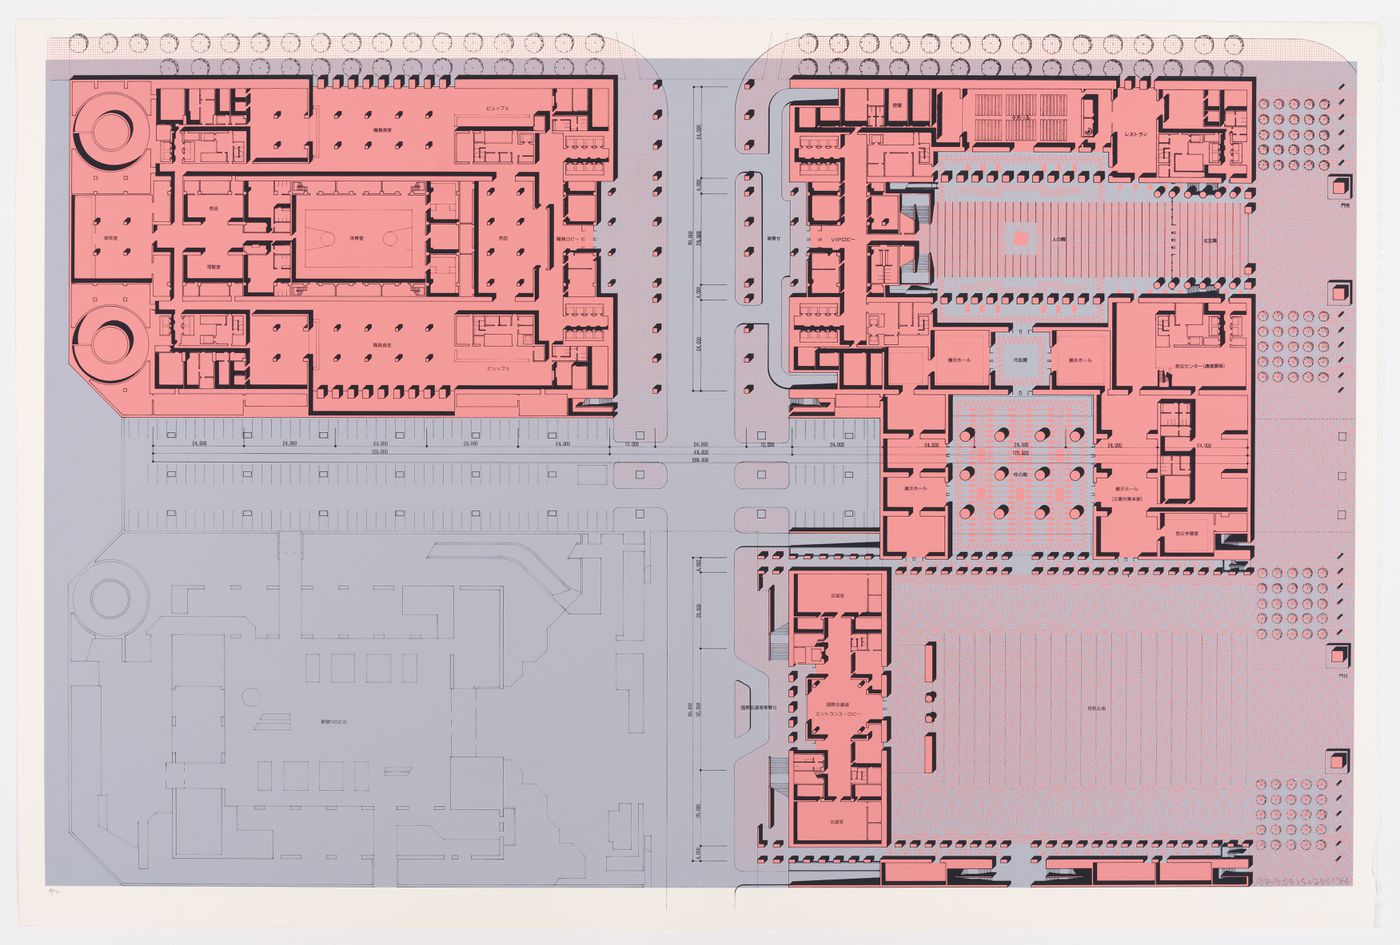 Ground floor plan of complex for the Tokyo City Hall competition entry